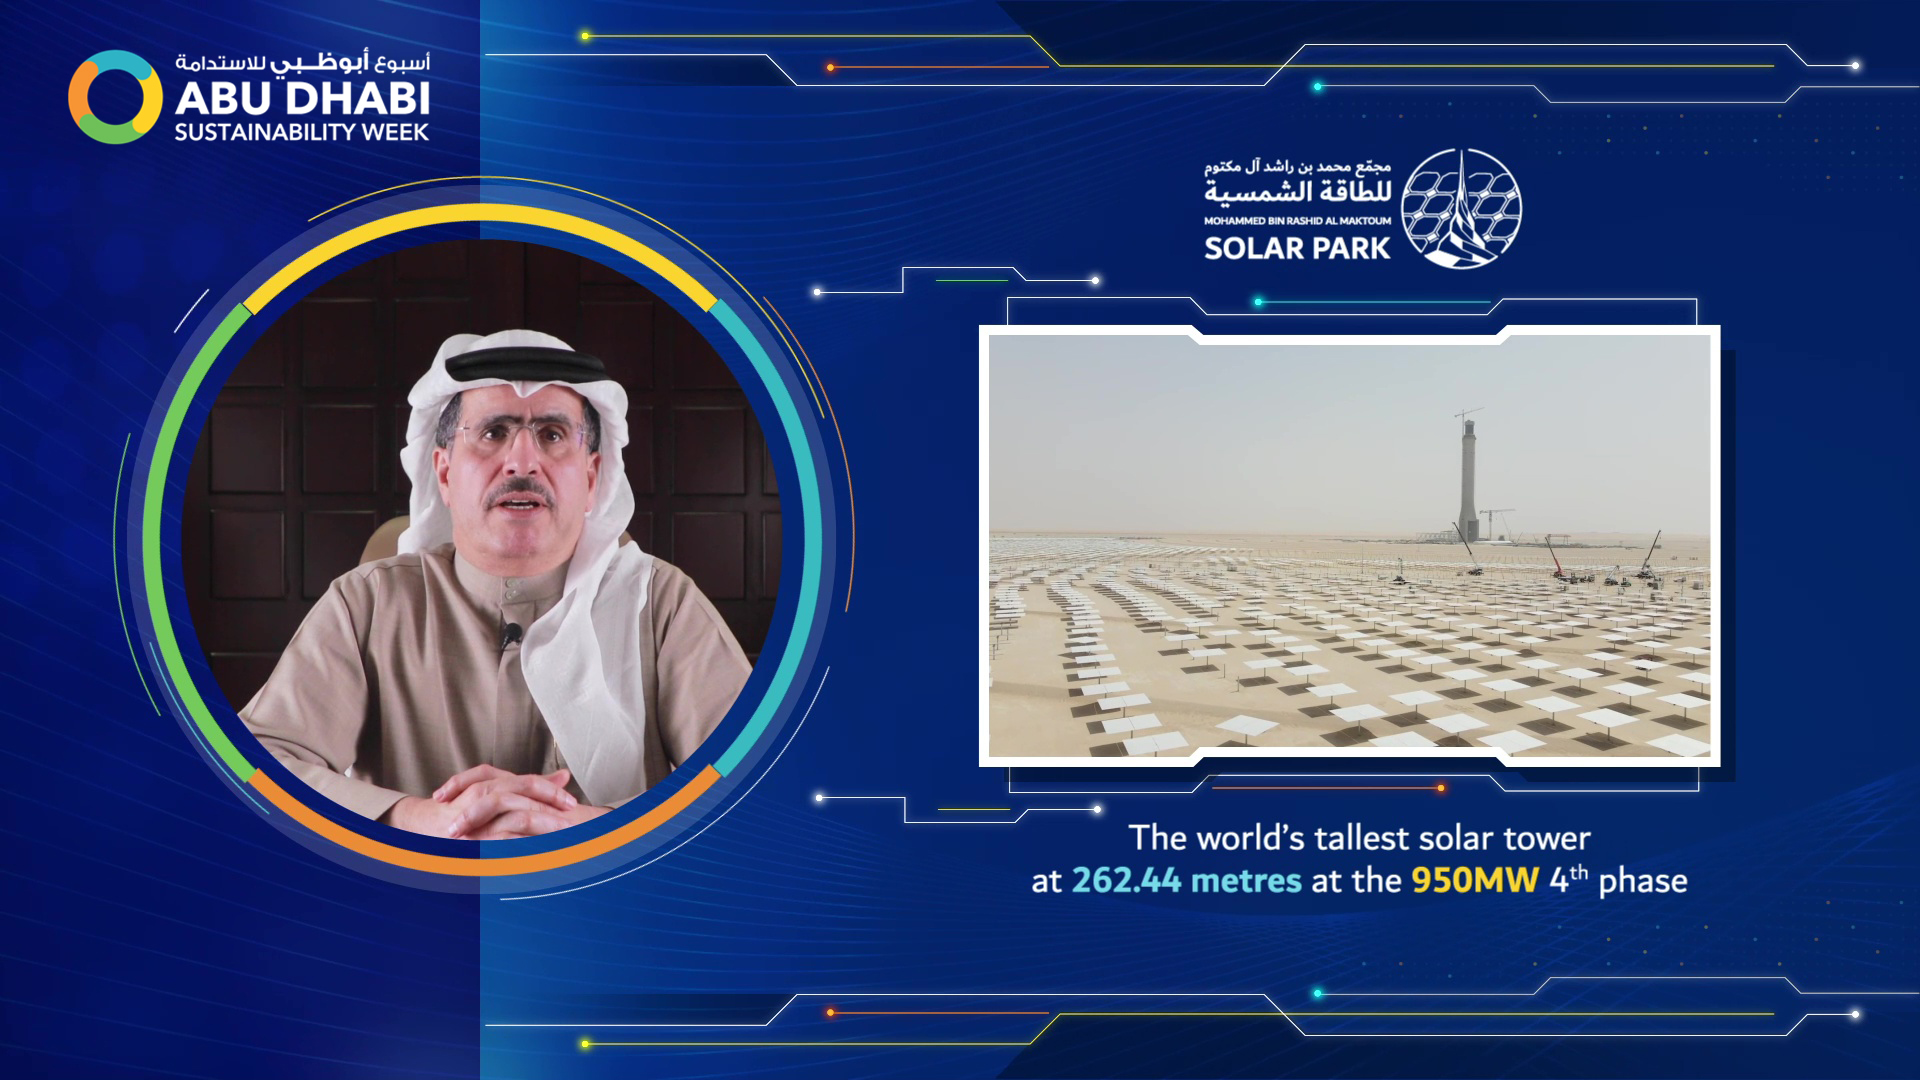 HE Saeed Mohammed Al Tayer announces that Dubai recorded lowest CML per year, electricity network losses, and water network losses in the world